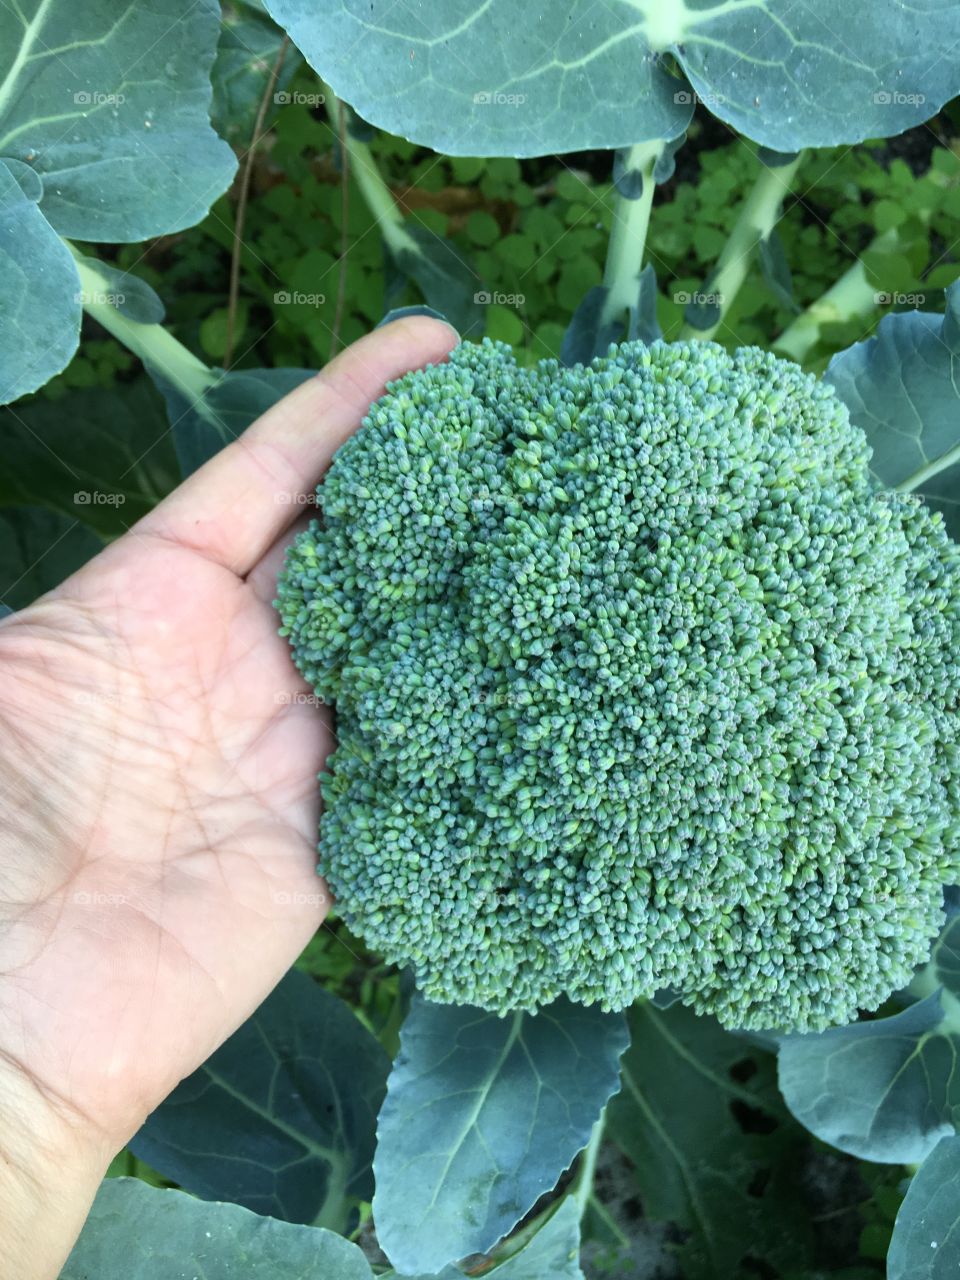 Broccoli from the home garden 